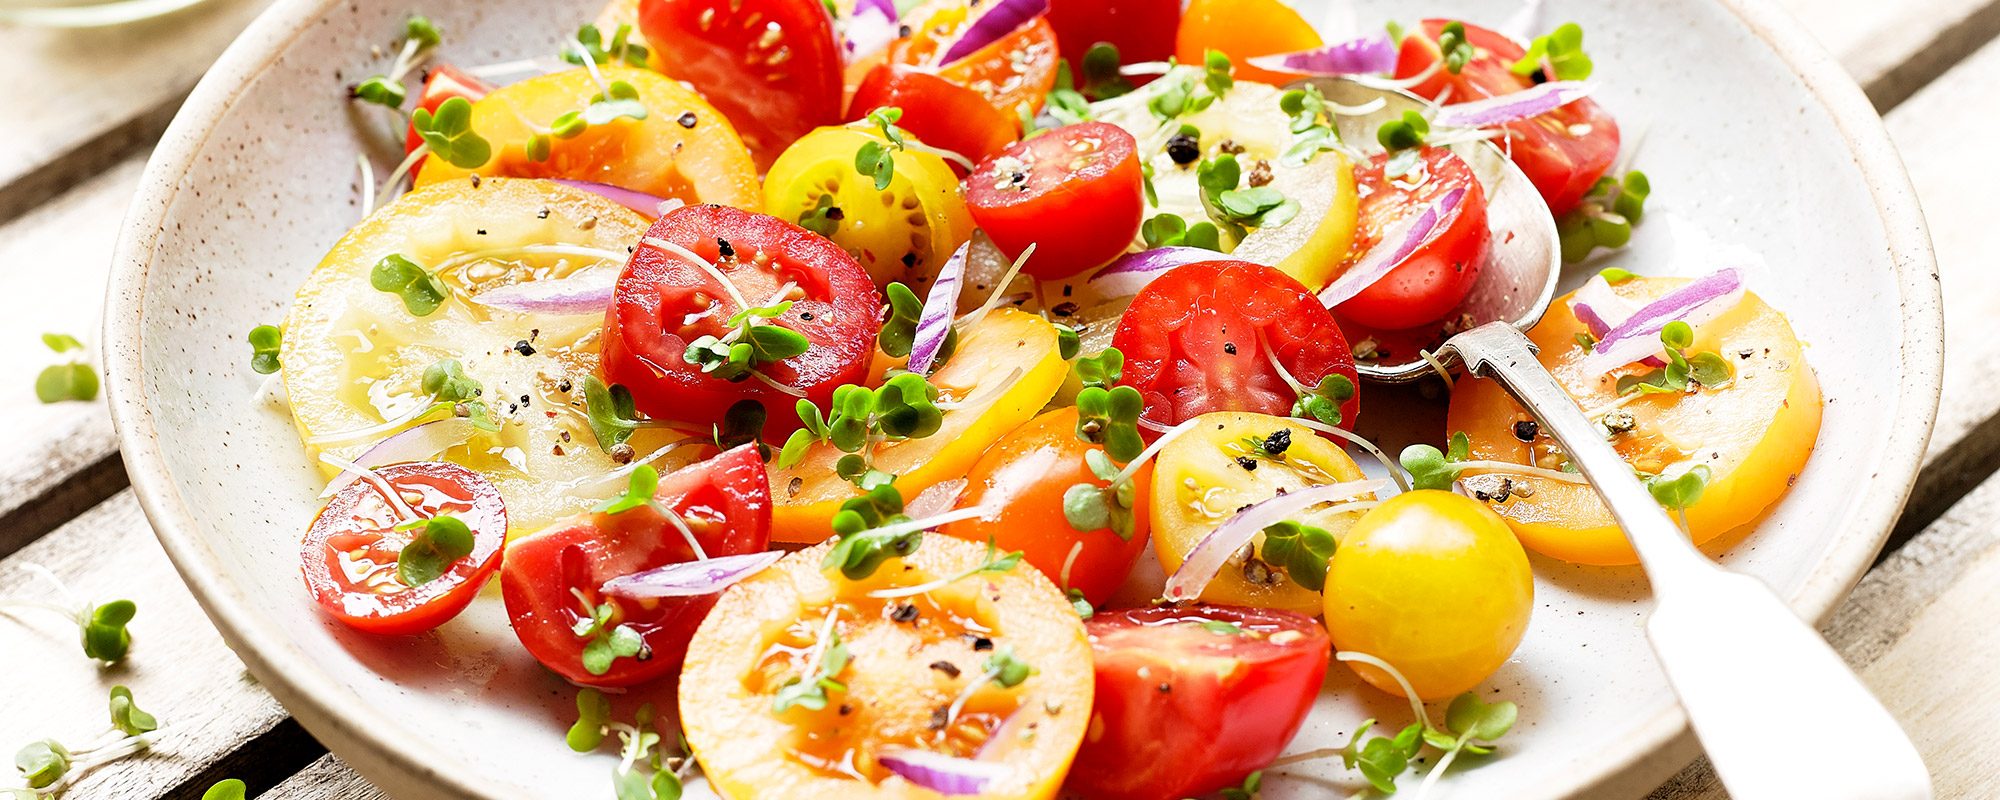 Tomato, Red Onion and Cress Salad​